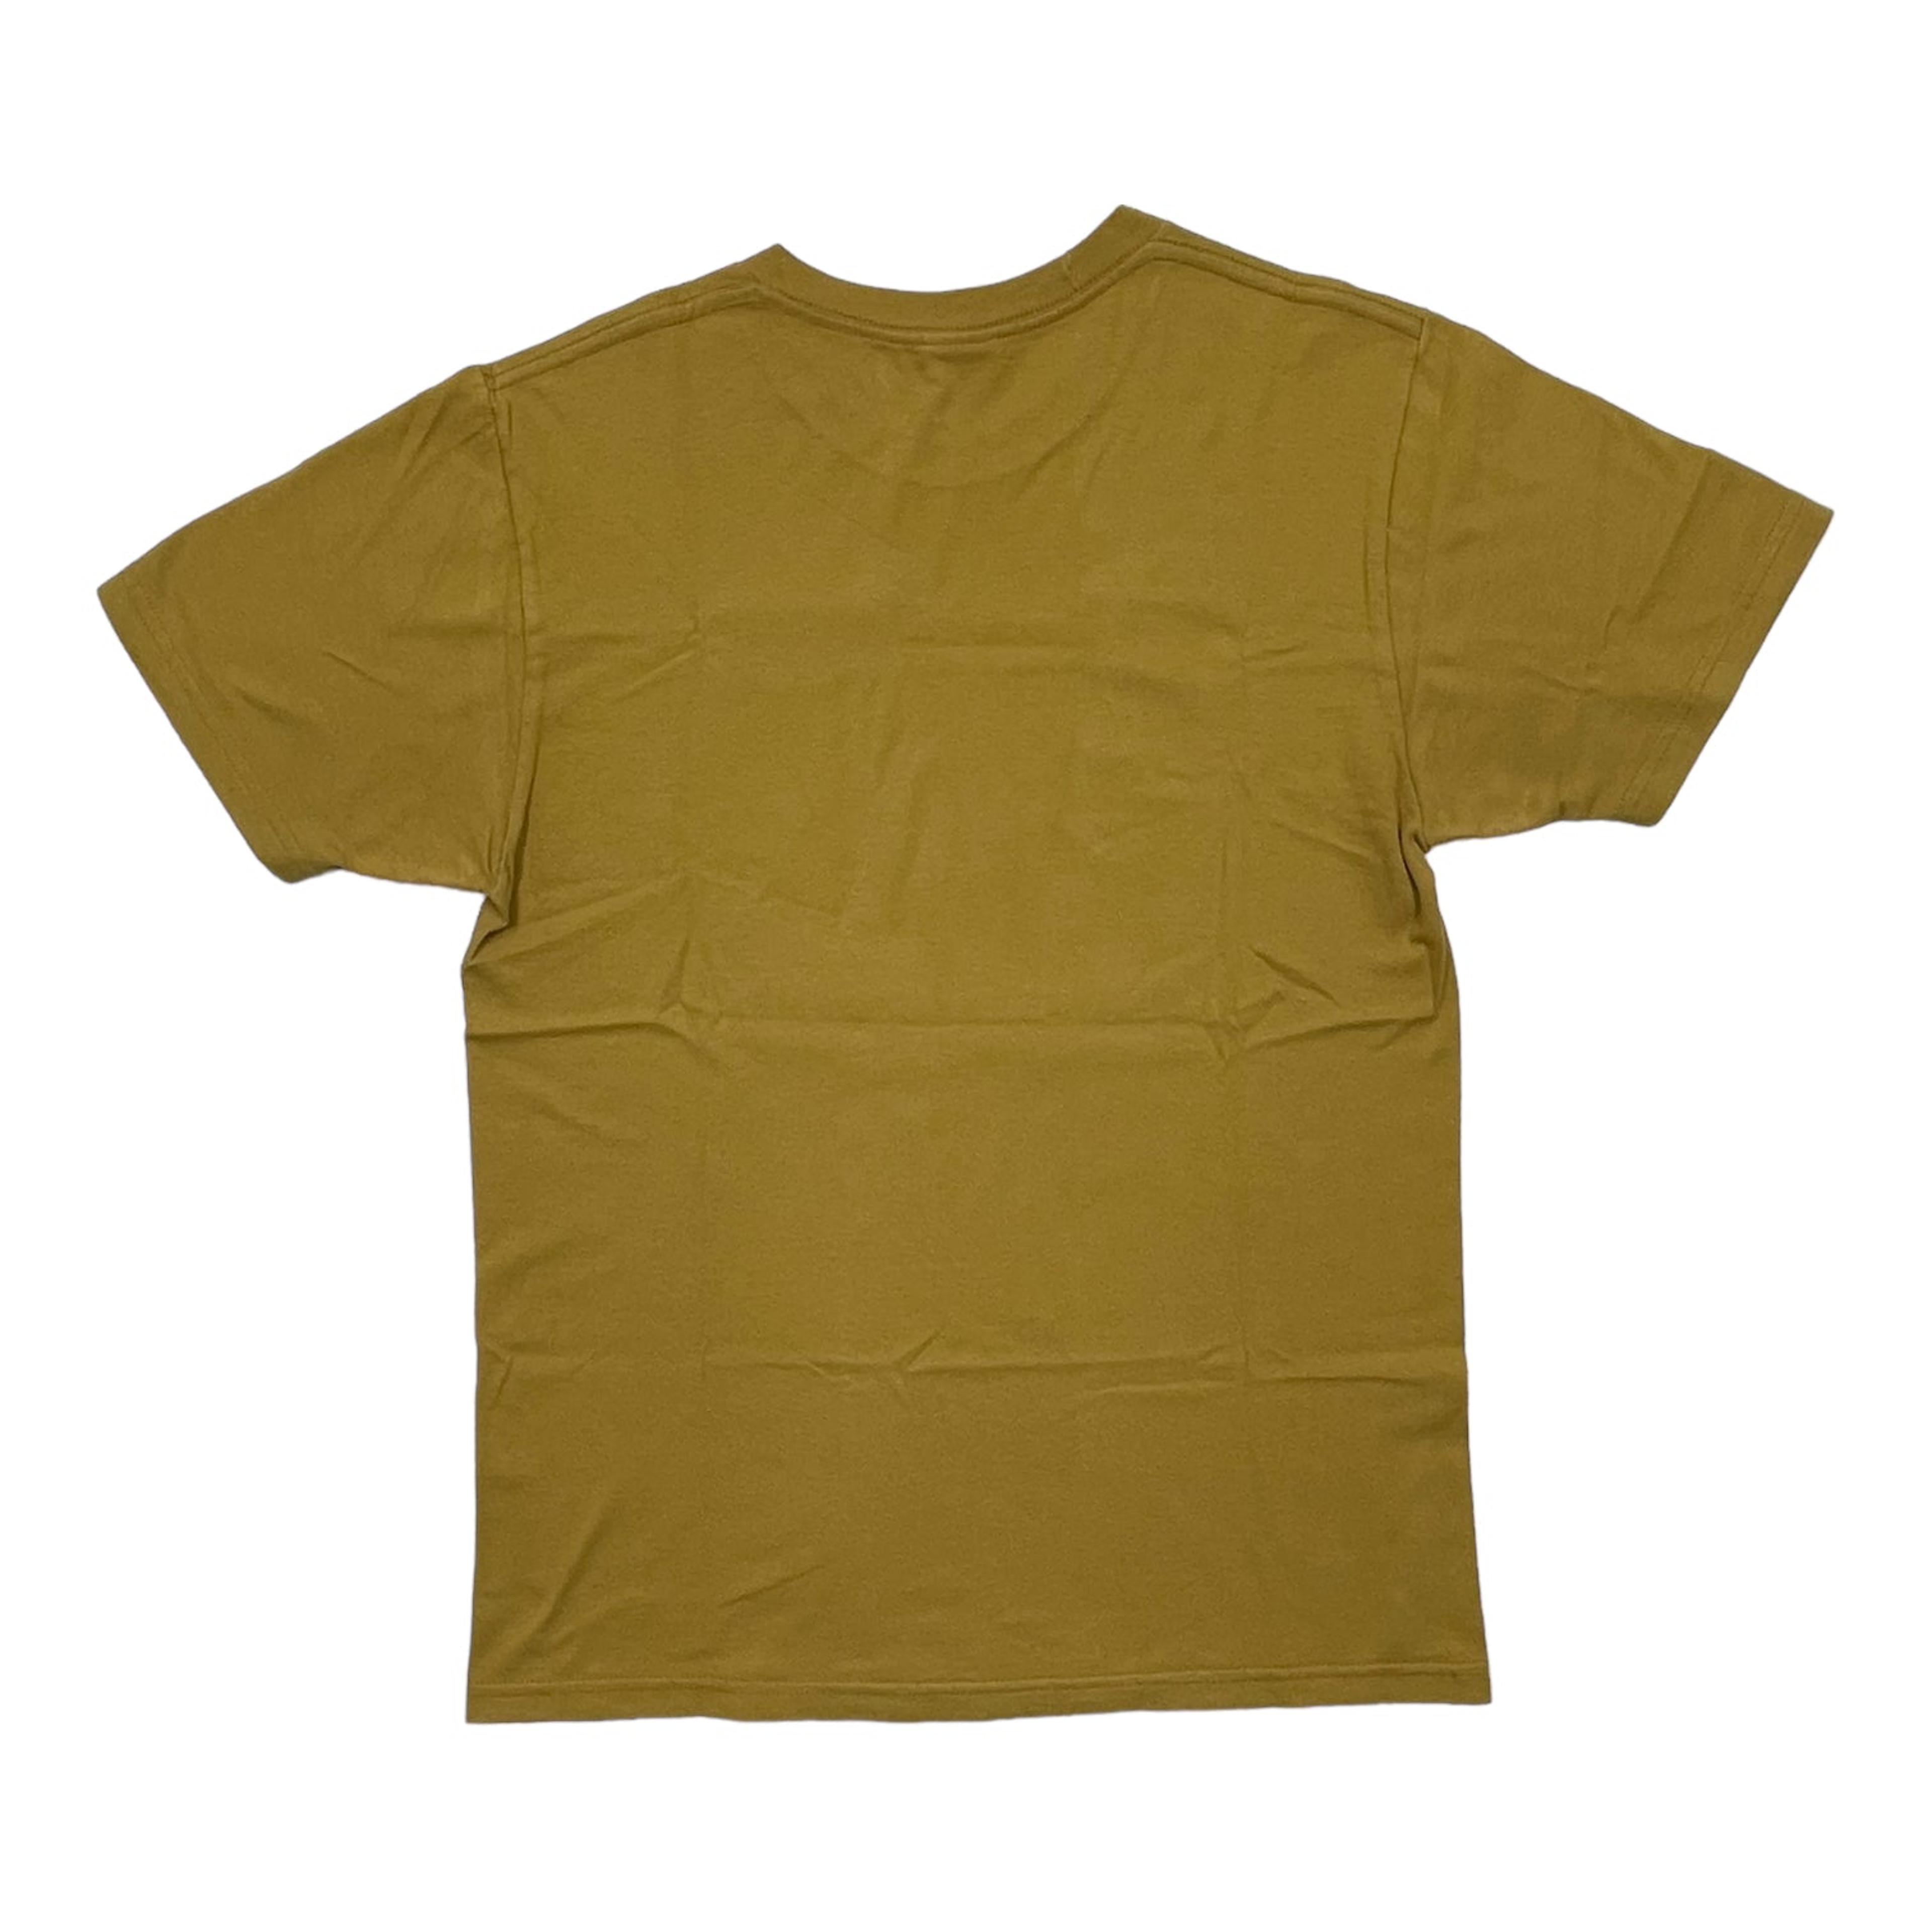 Alternate View 1 of Supreme Morrissey Short Sleeve Tee Shirt Gold Pre-Owned